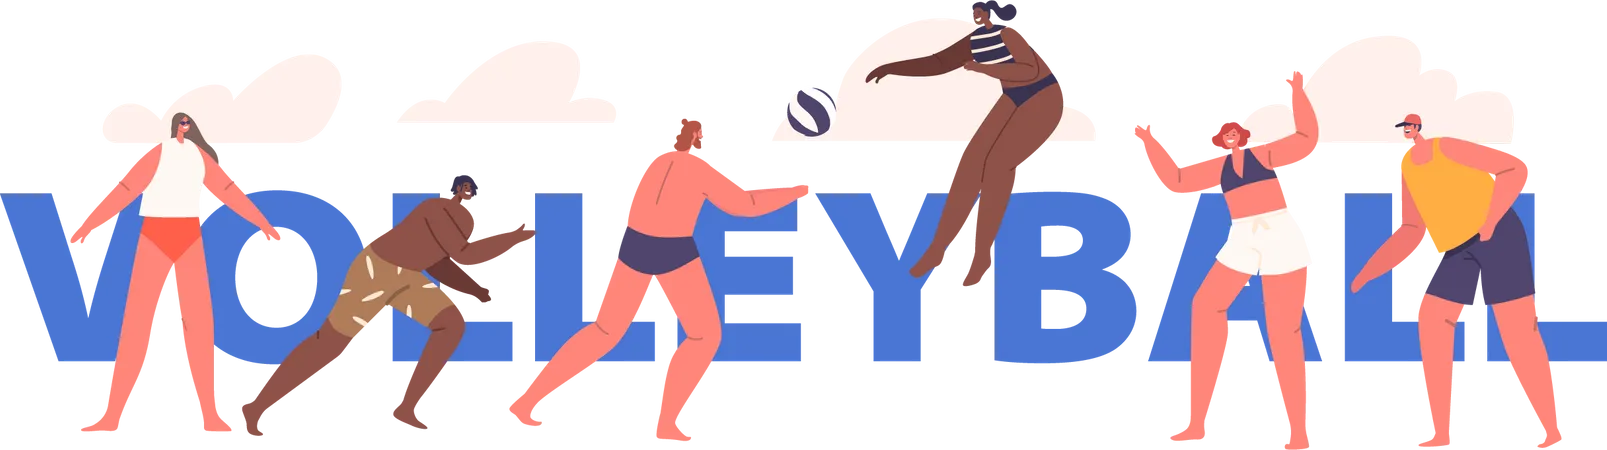 People Enjoy Beach Volleyball By Diving  Illustration